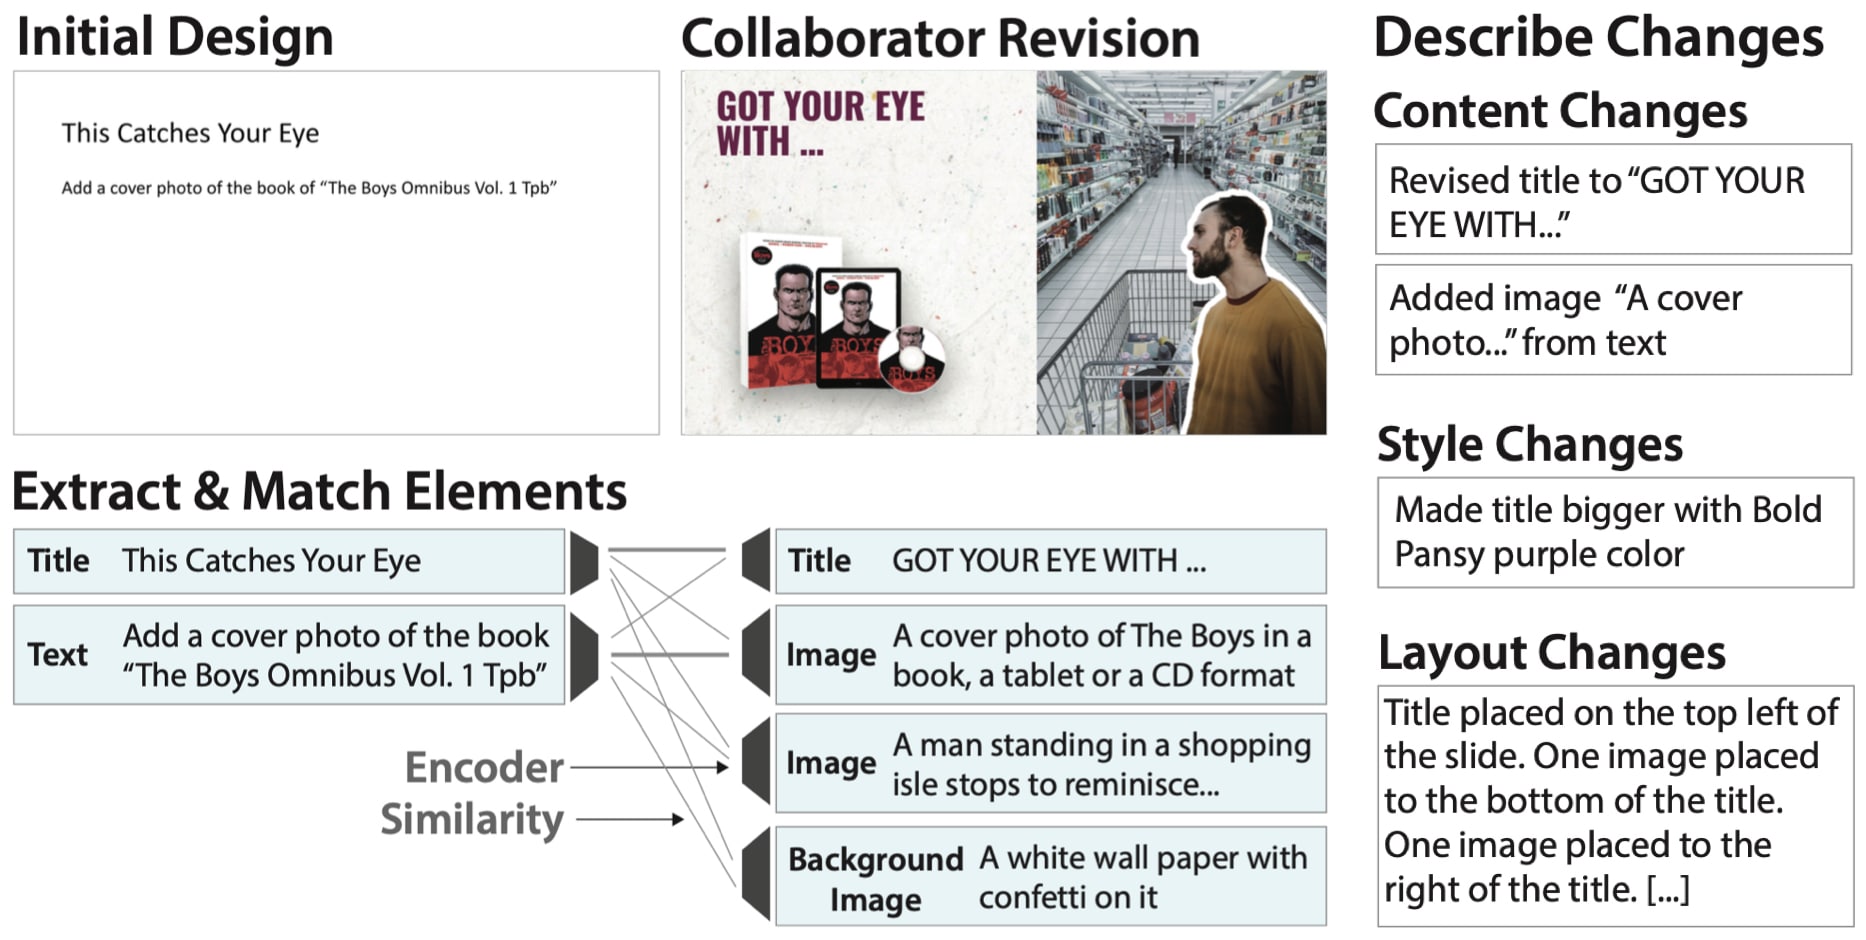 Image Description - A diagram of Diffscriber system, which enables BVI presenters to better understand revisions to their presentations by describing content, layout and style changes, and thus supports more accessible mixed-ability presentation authoring.